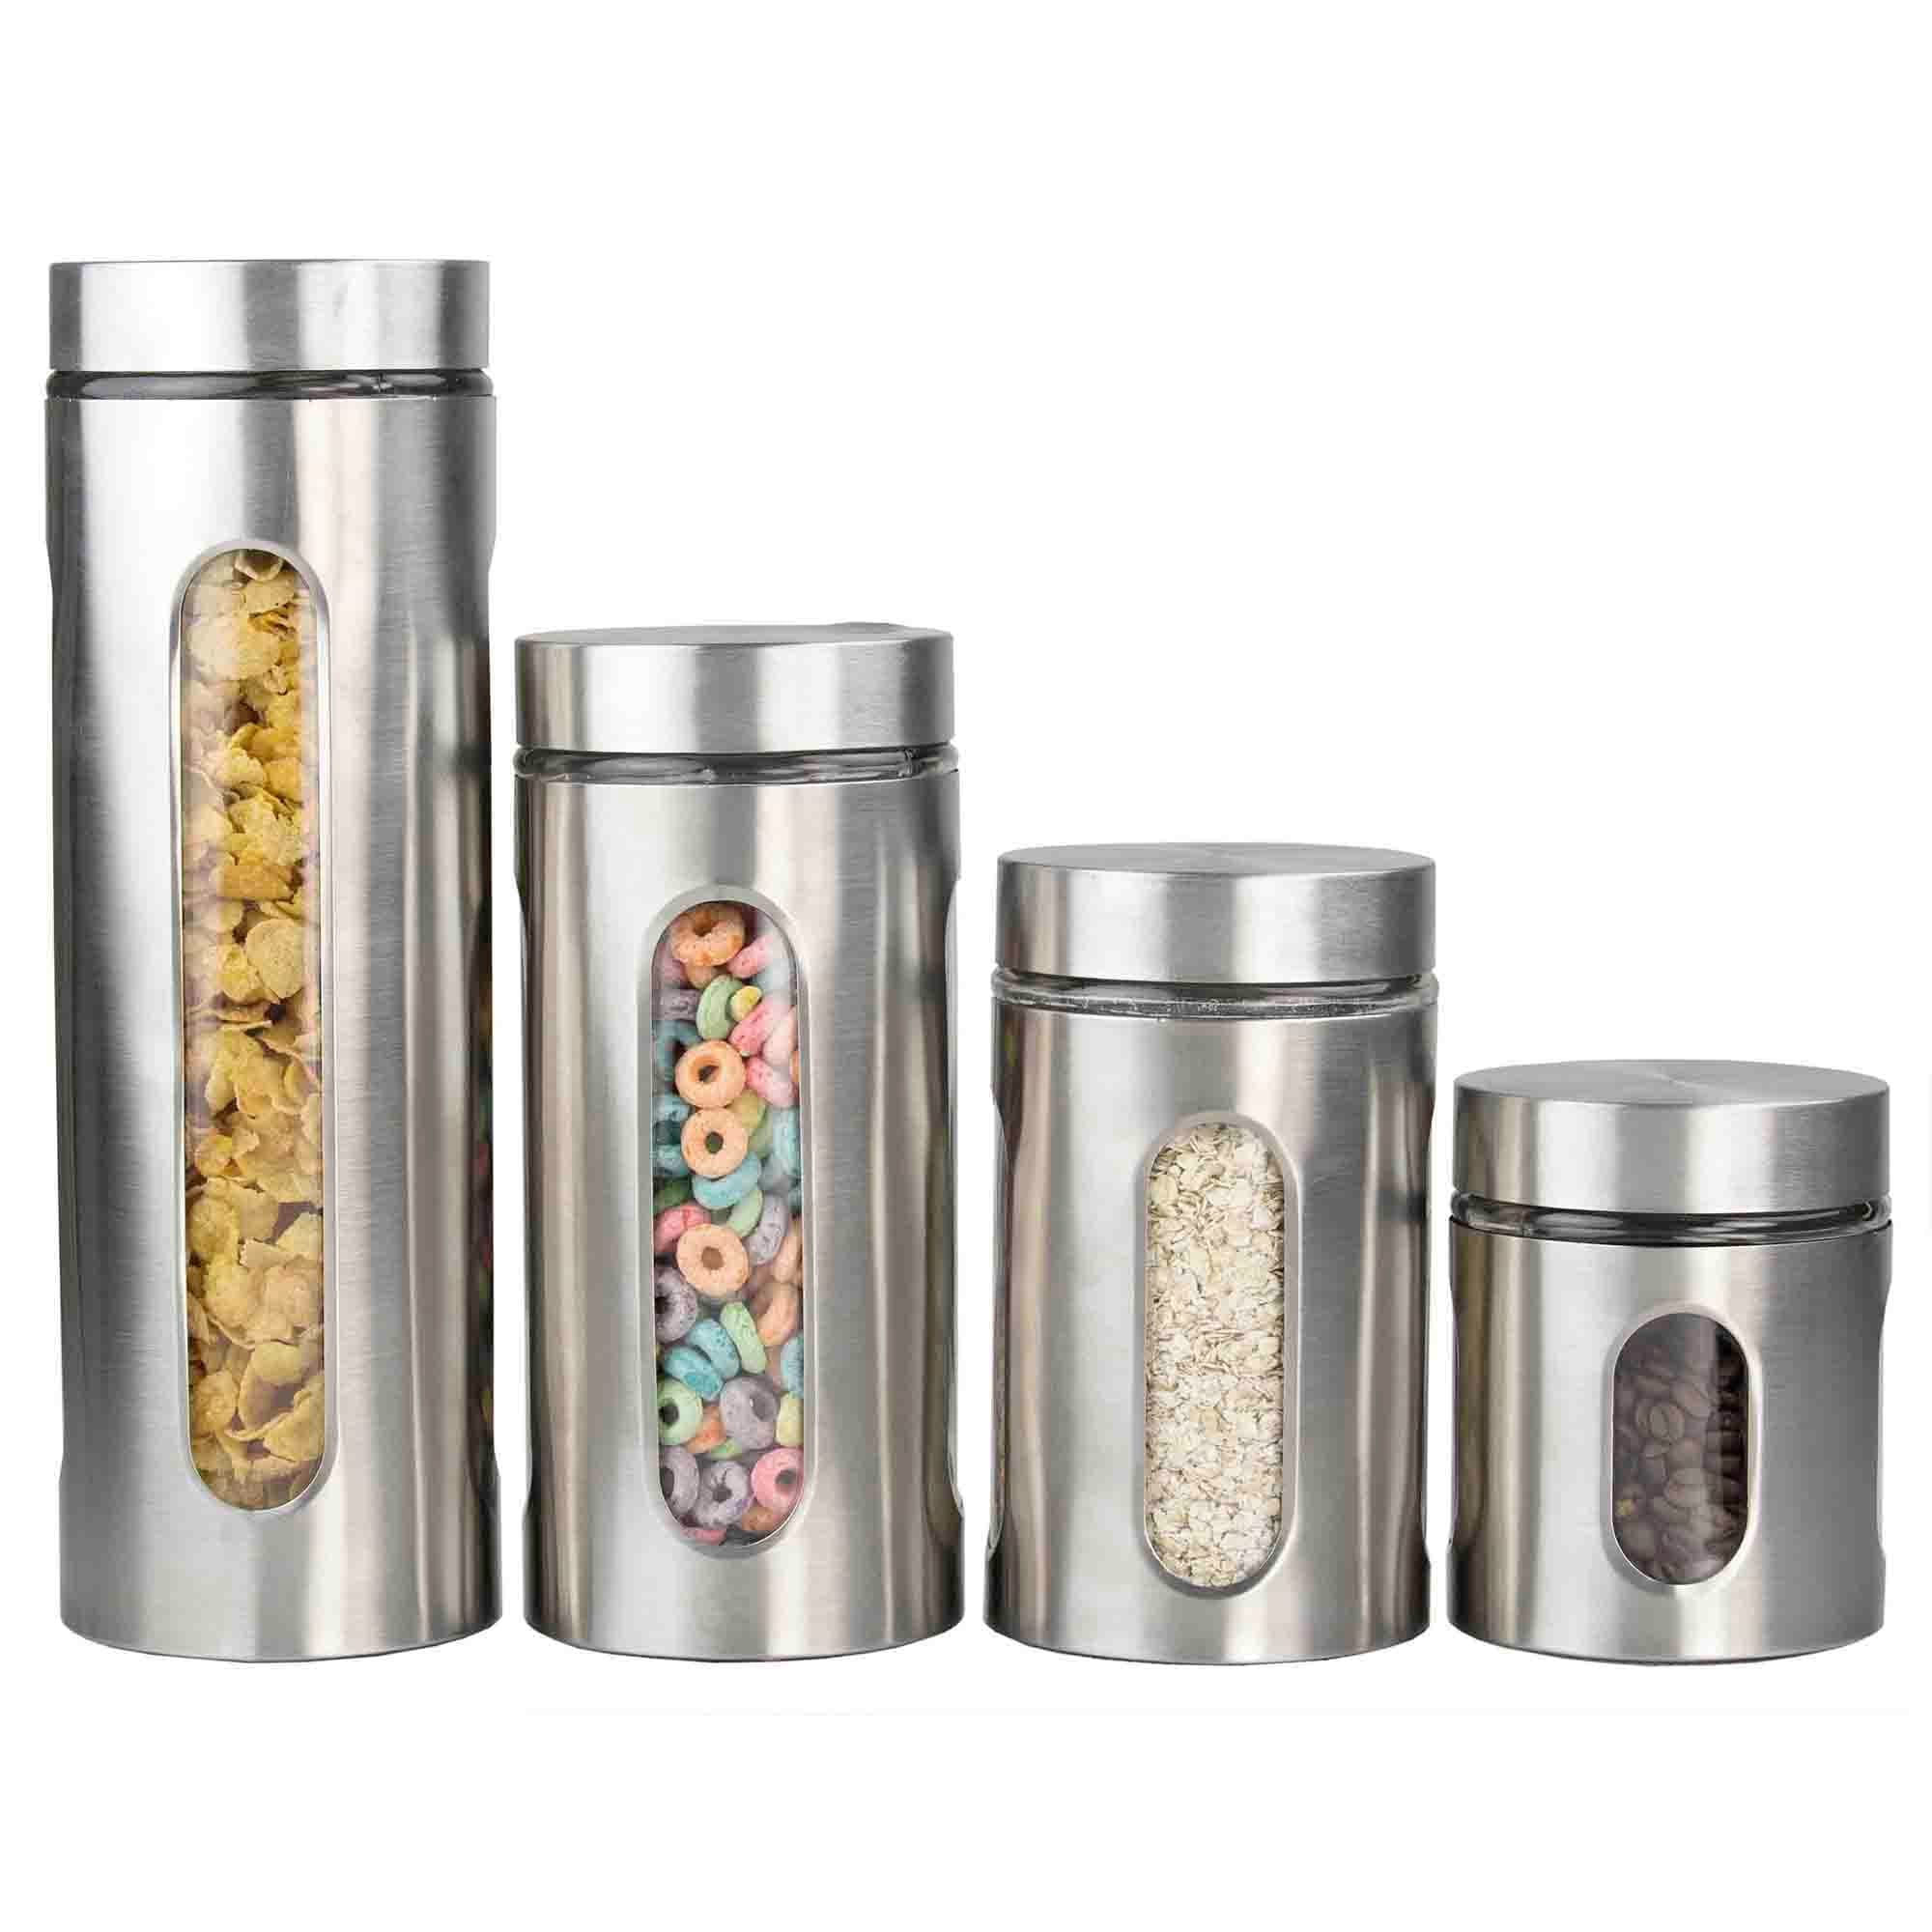 Home Basics 4 Piece Metal Canister Set $12.00 EACH, CASE PACK OF 4